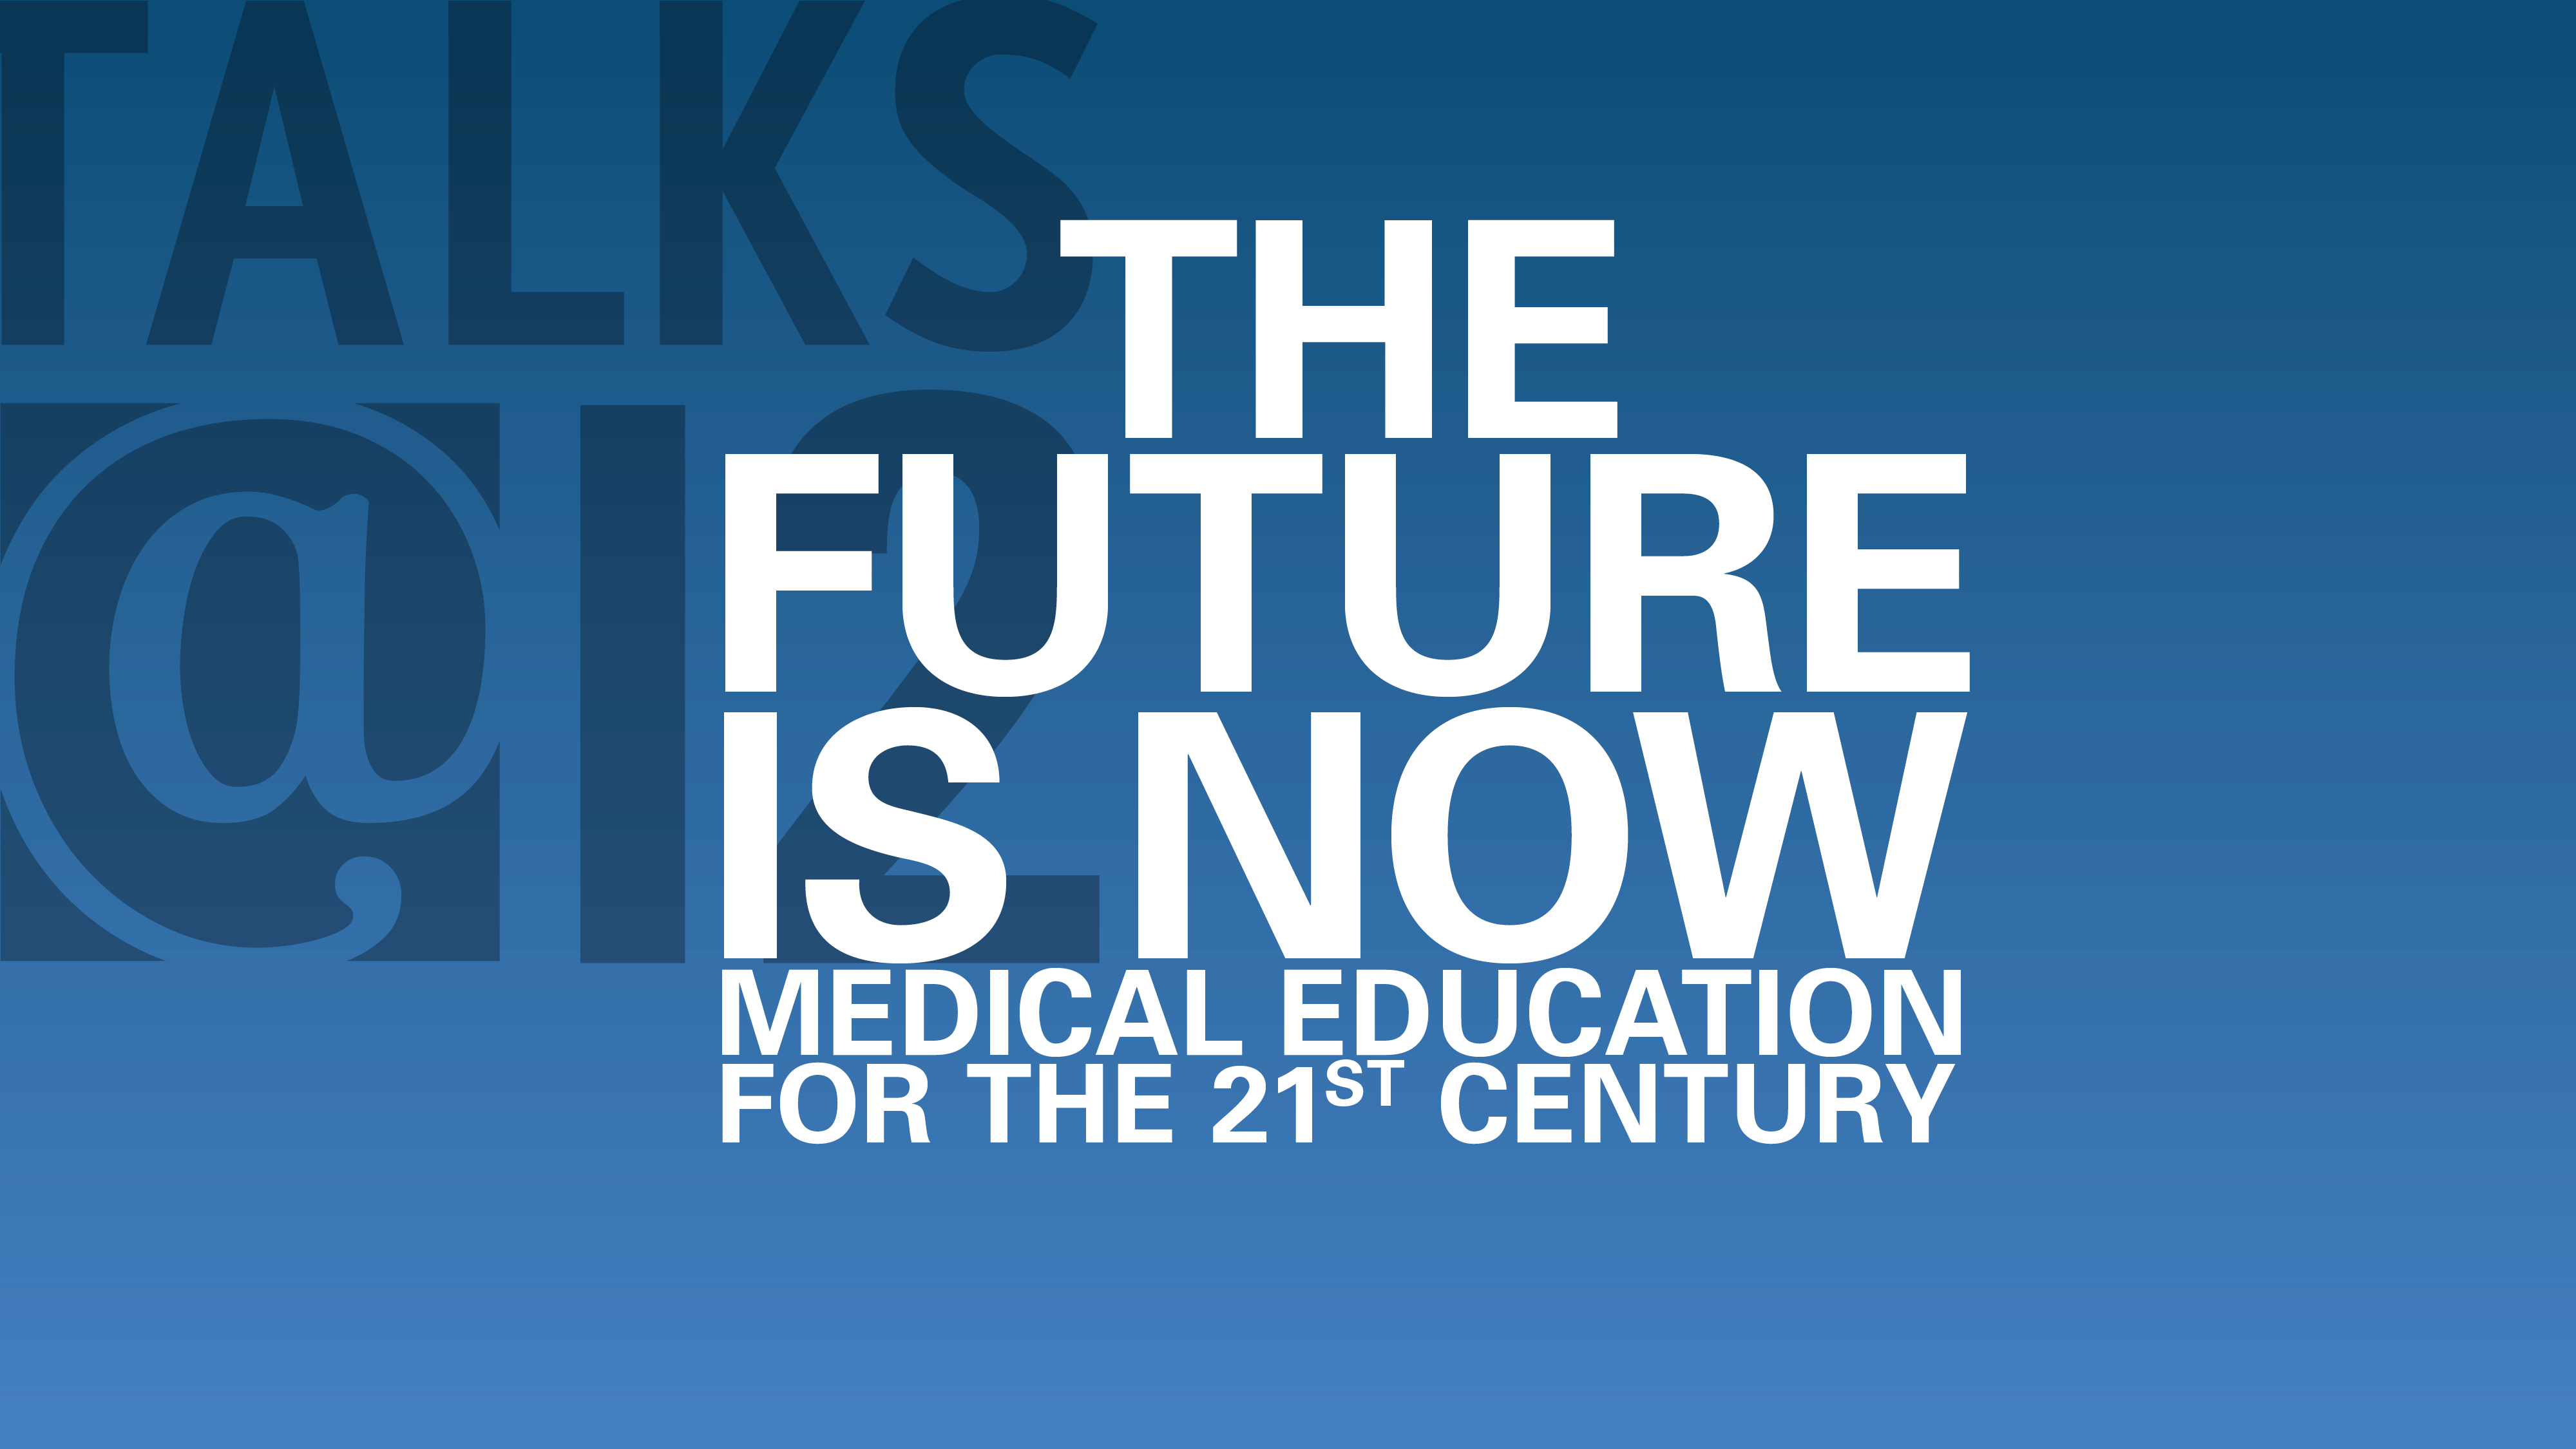 The Future Is Now: Medical education for the 21st century